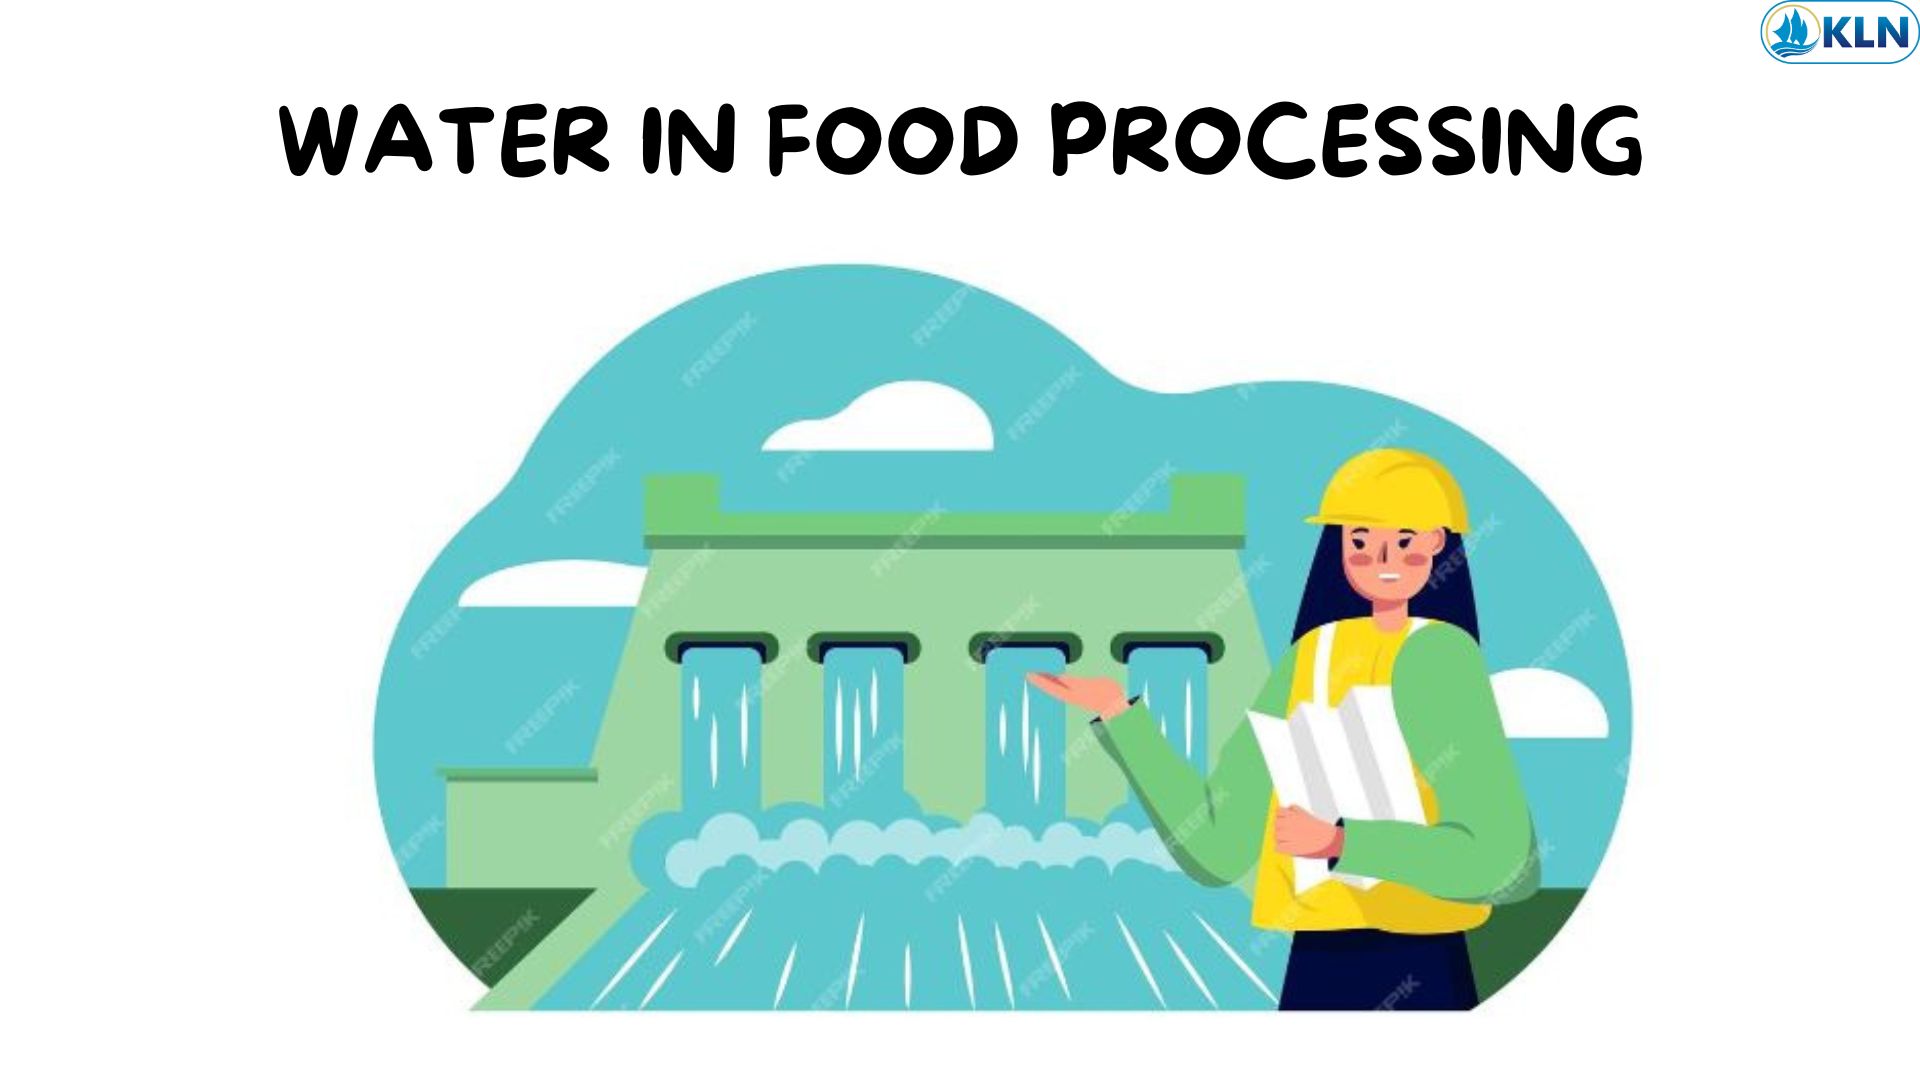 WATER IN FOOD PROCESSING